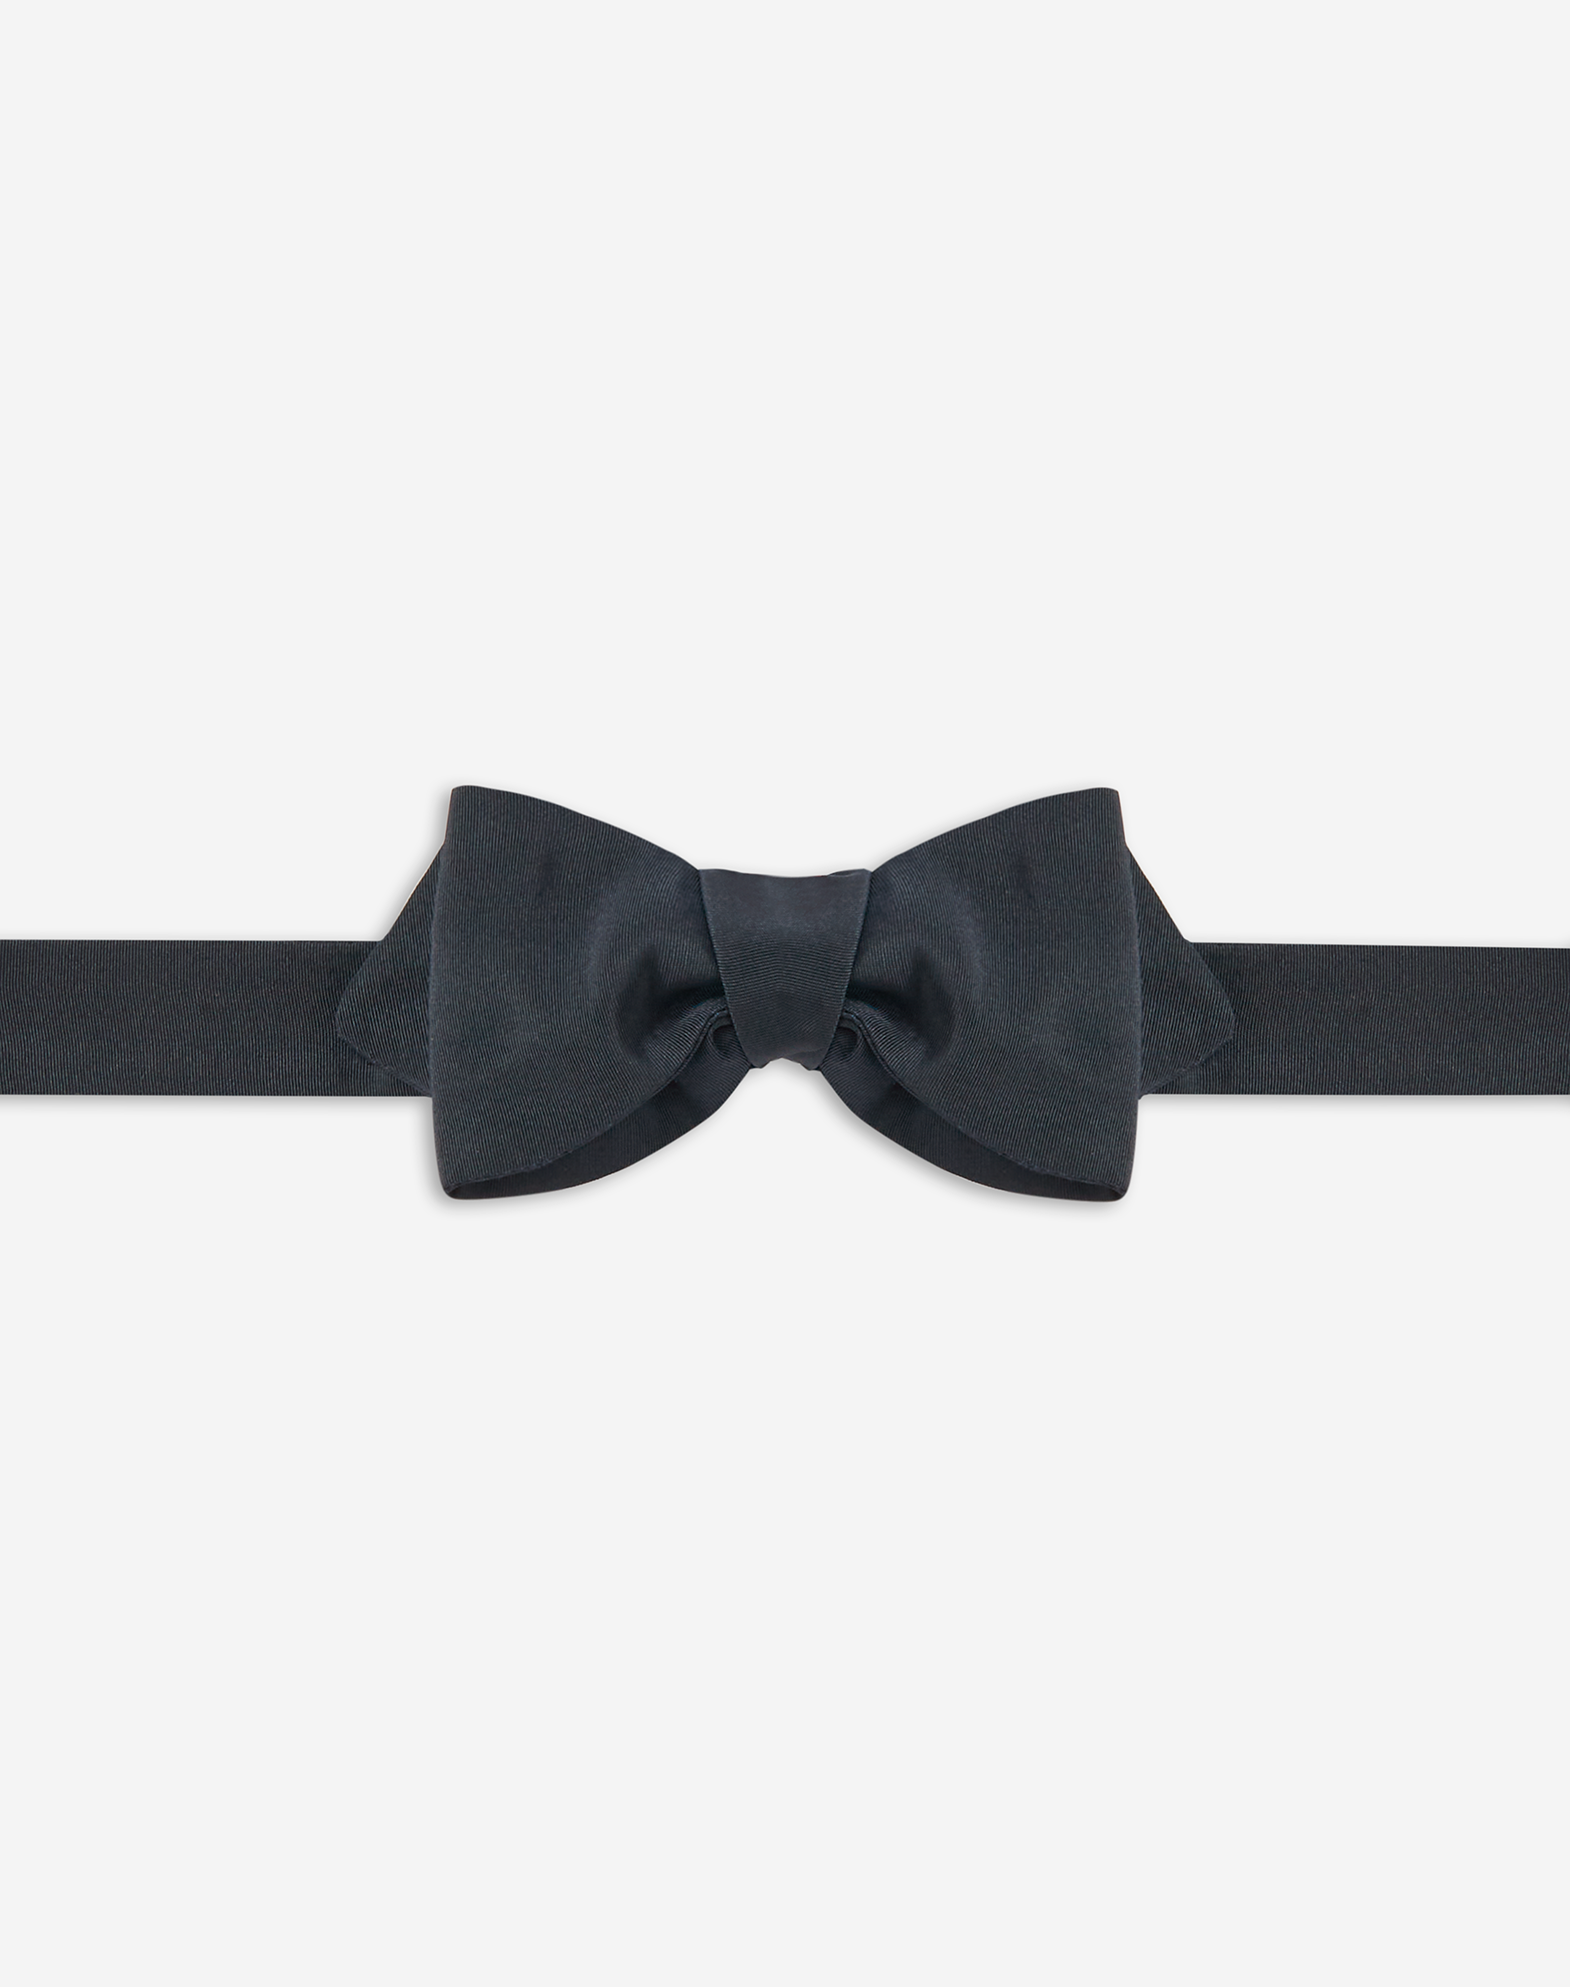 Dunhill Luxury Men's Bow Ties